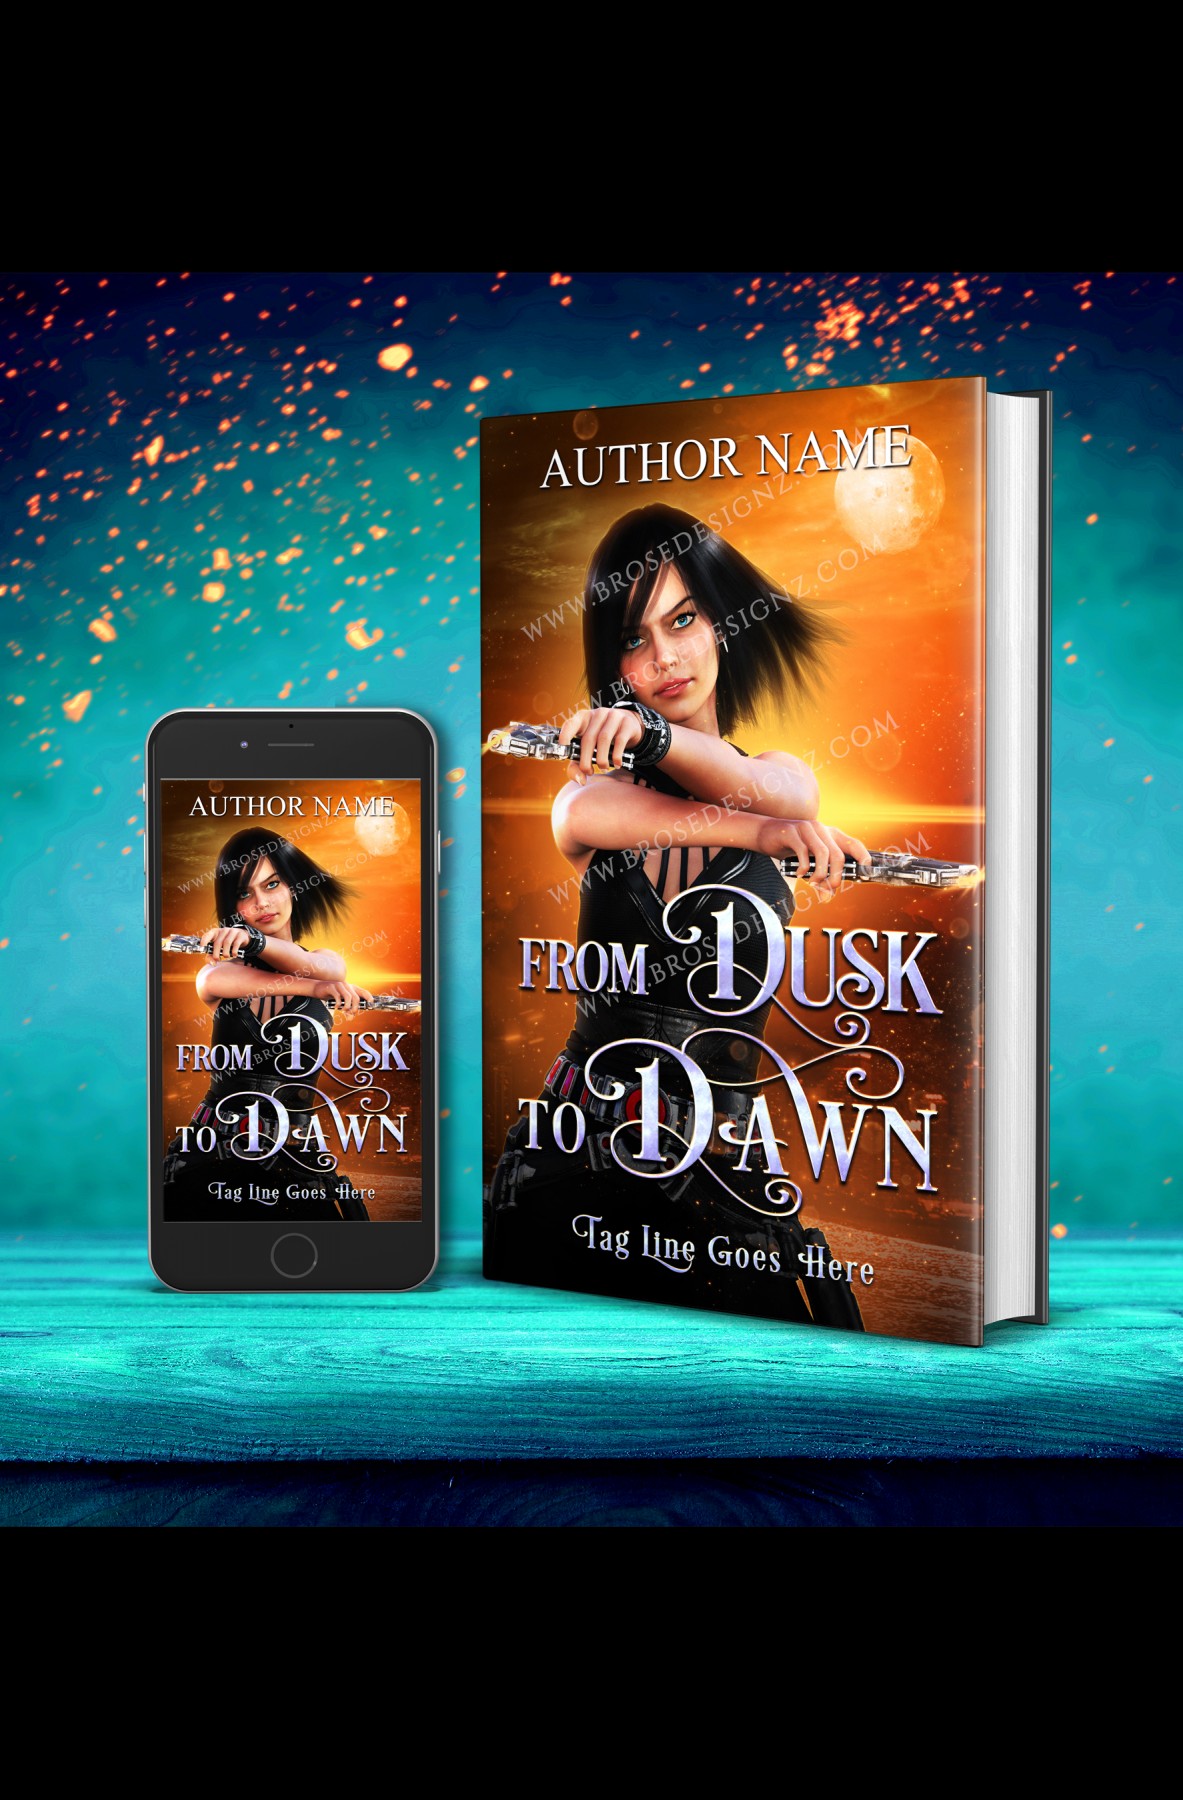 from dawn until dusk download free